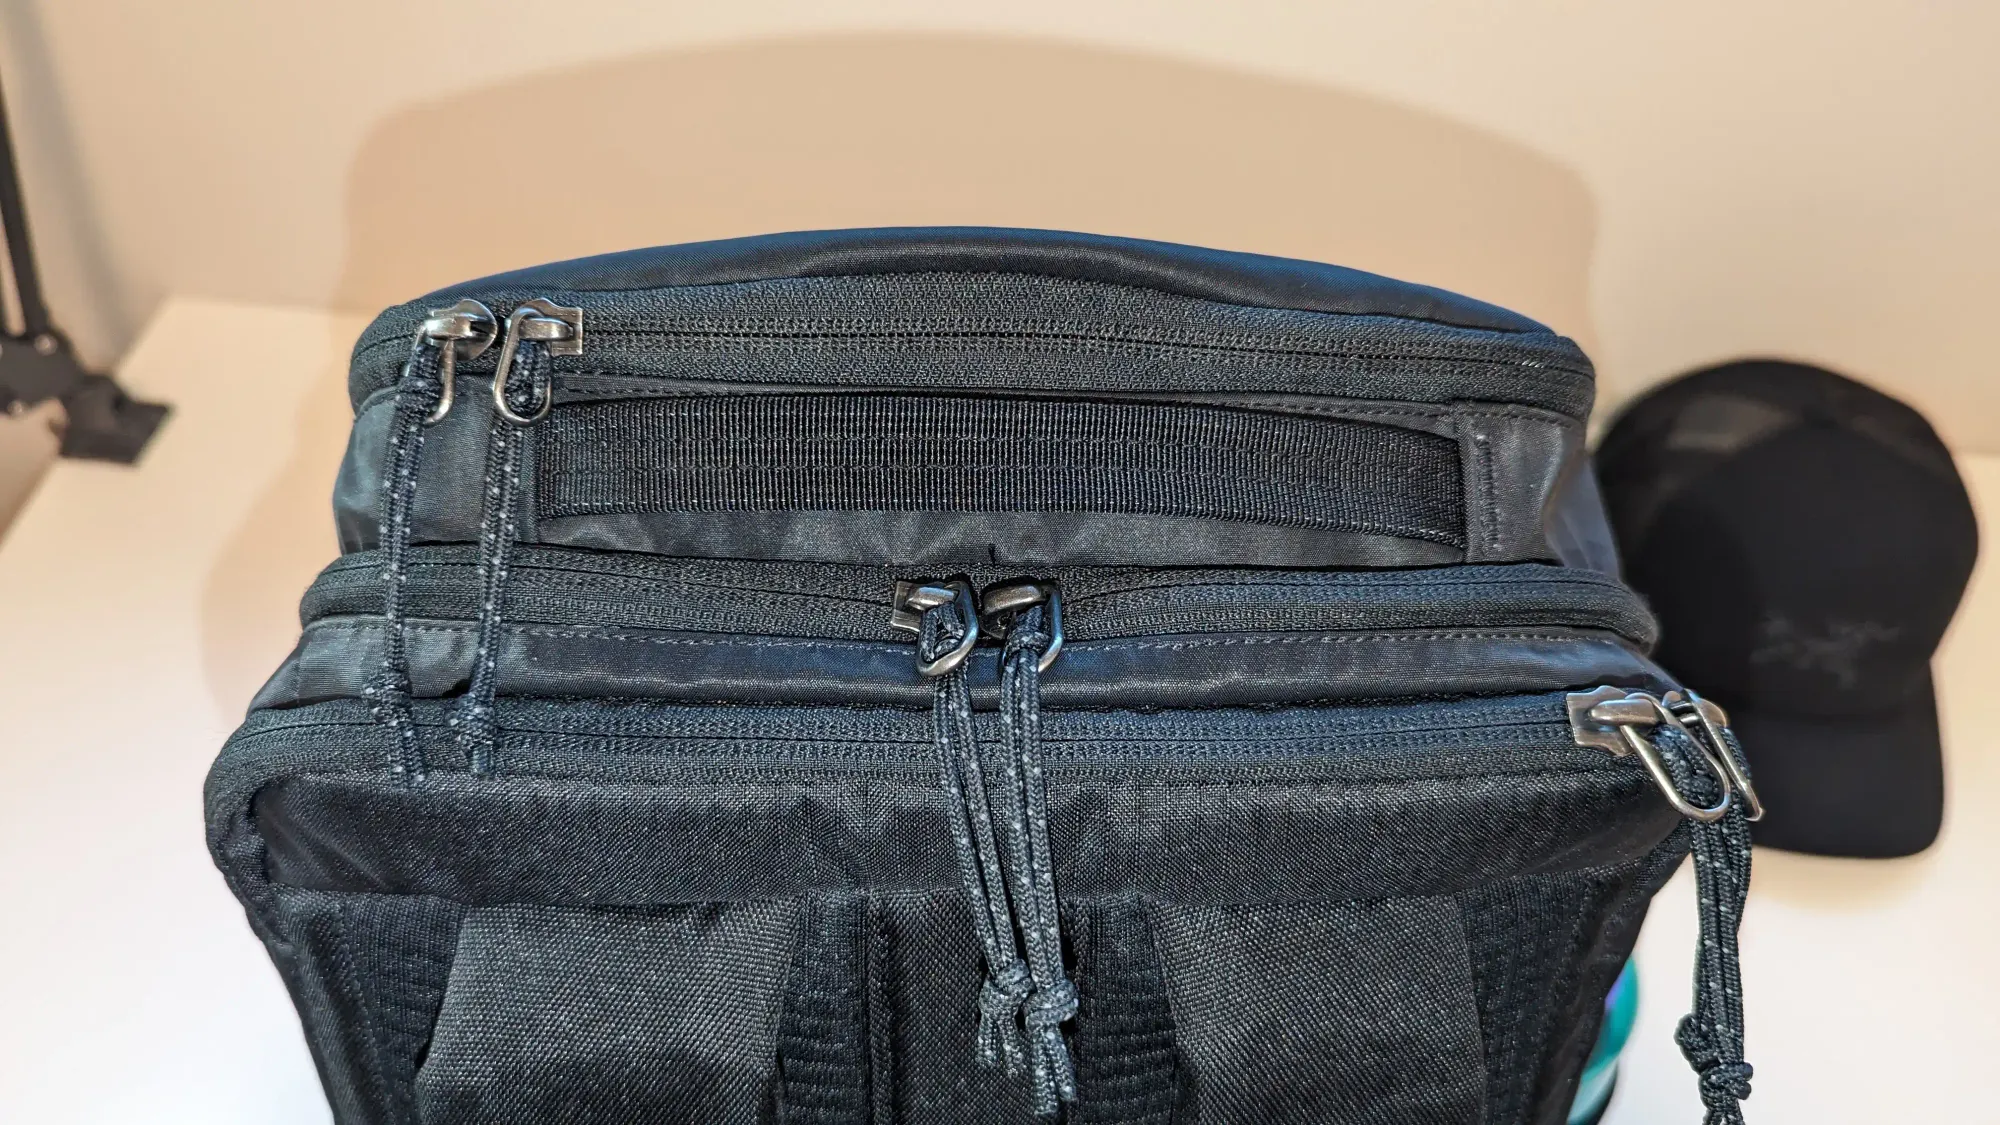 Zippers stacked neatly give plenty of access to all compartments. 